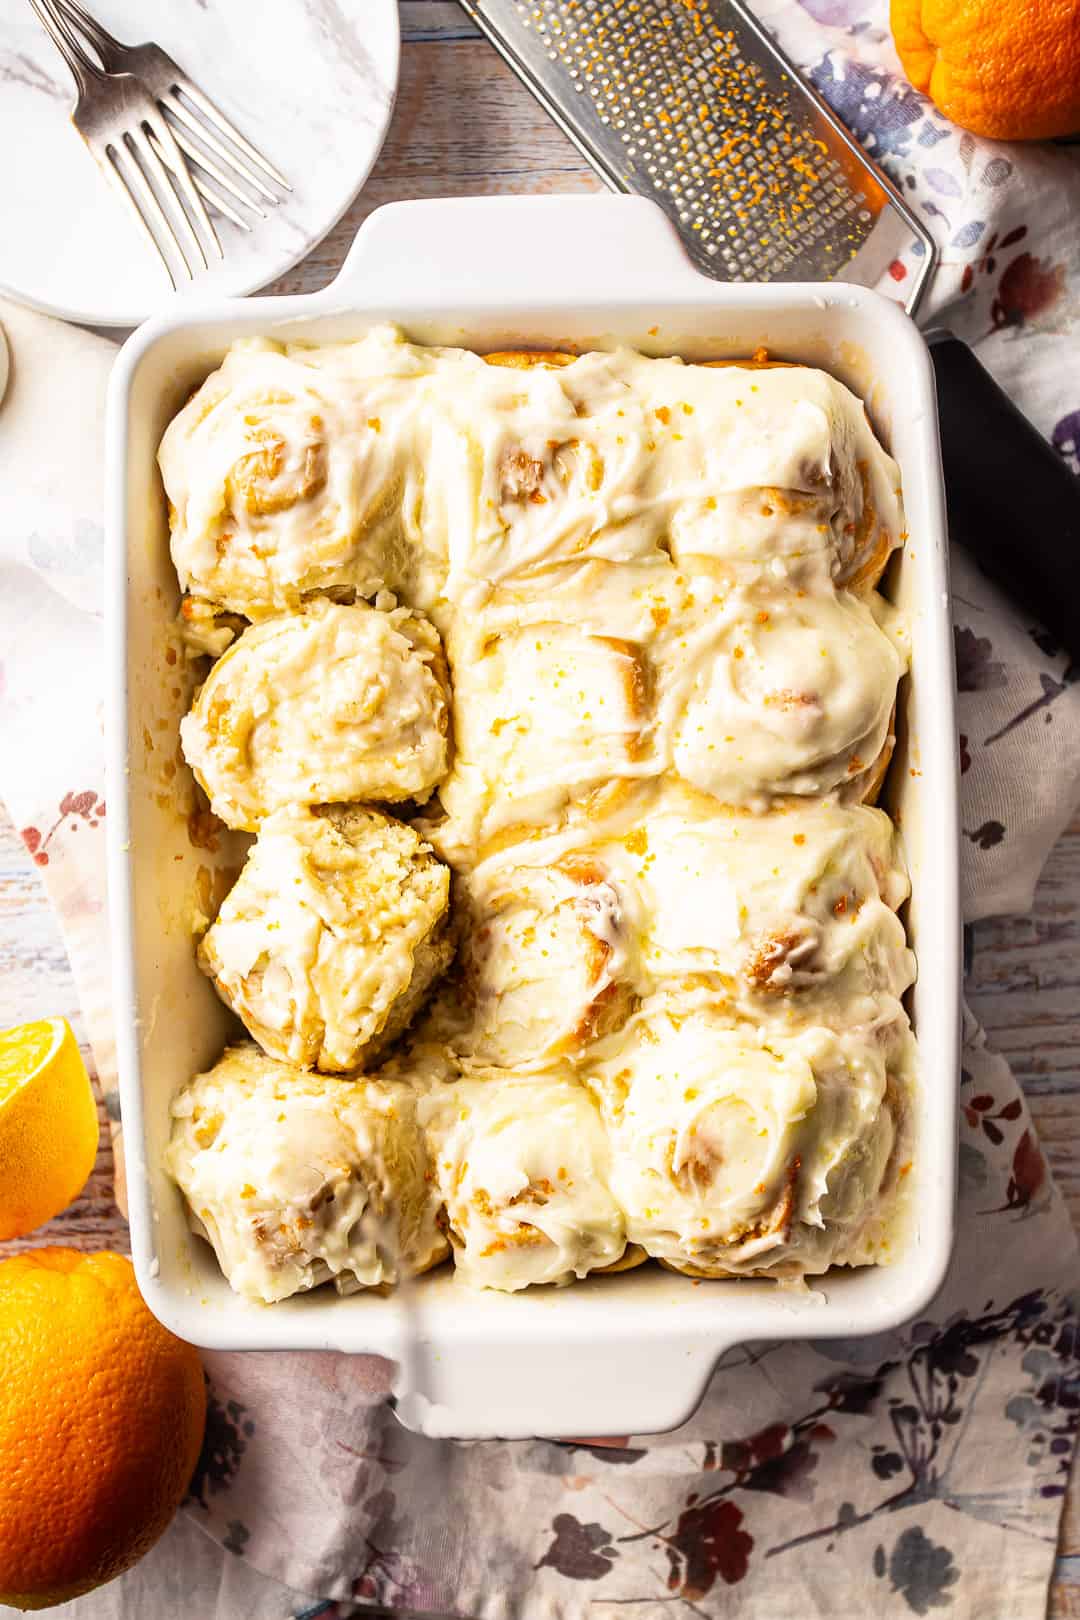 Orange roll recipe, baked in a rectangular dish and slathered with cream cheese icing.